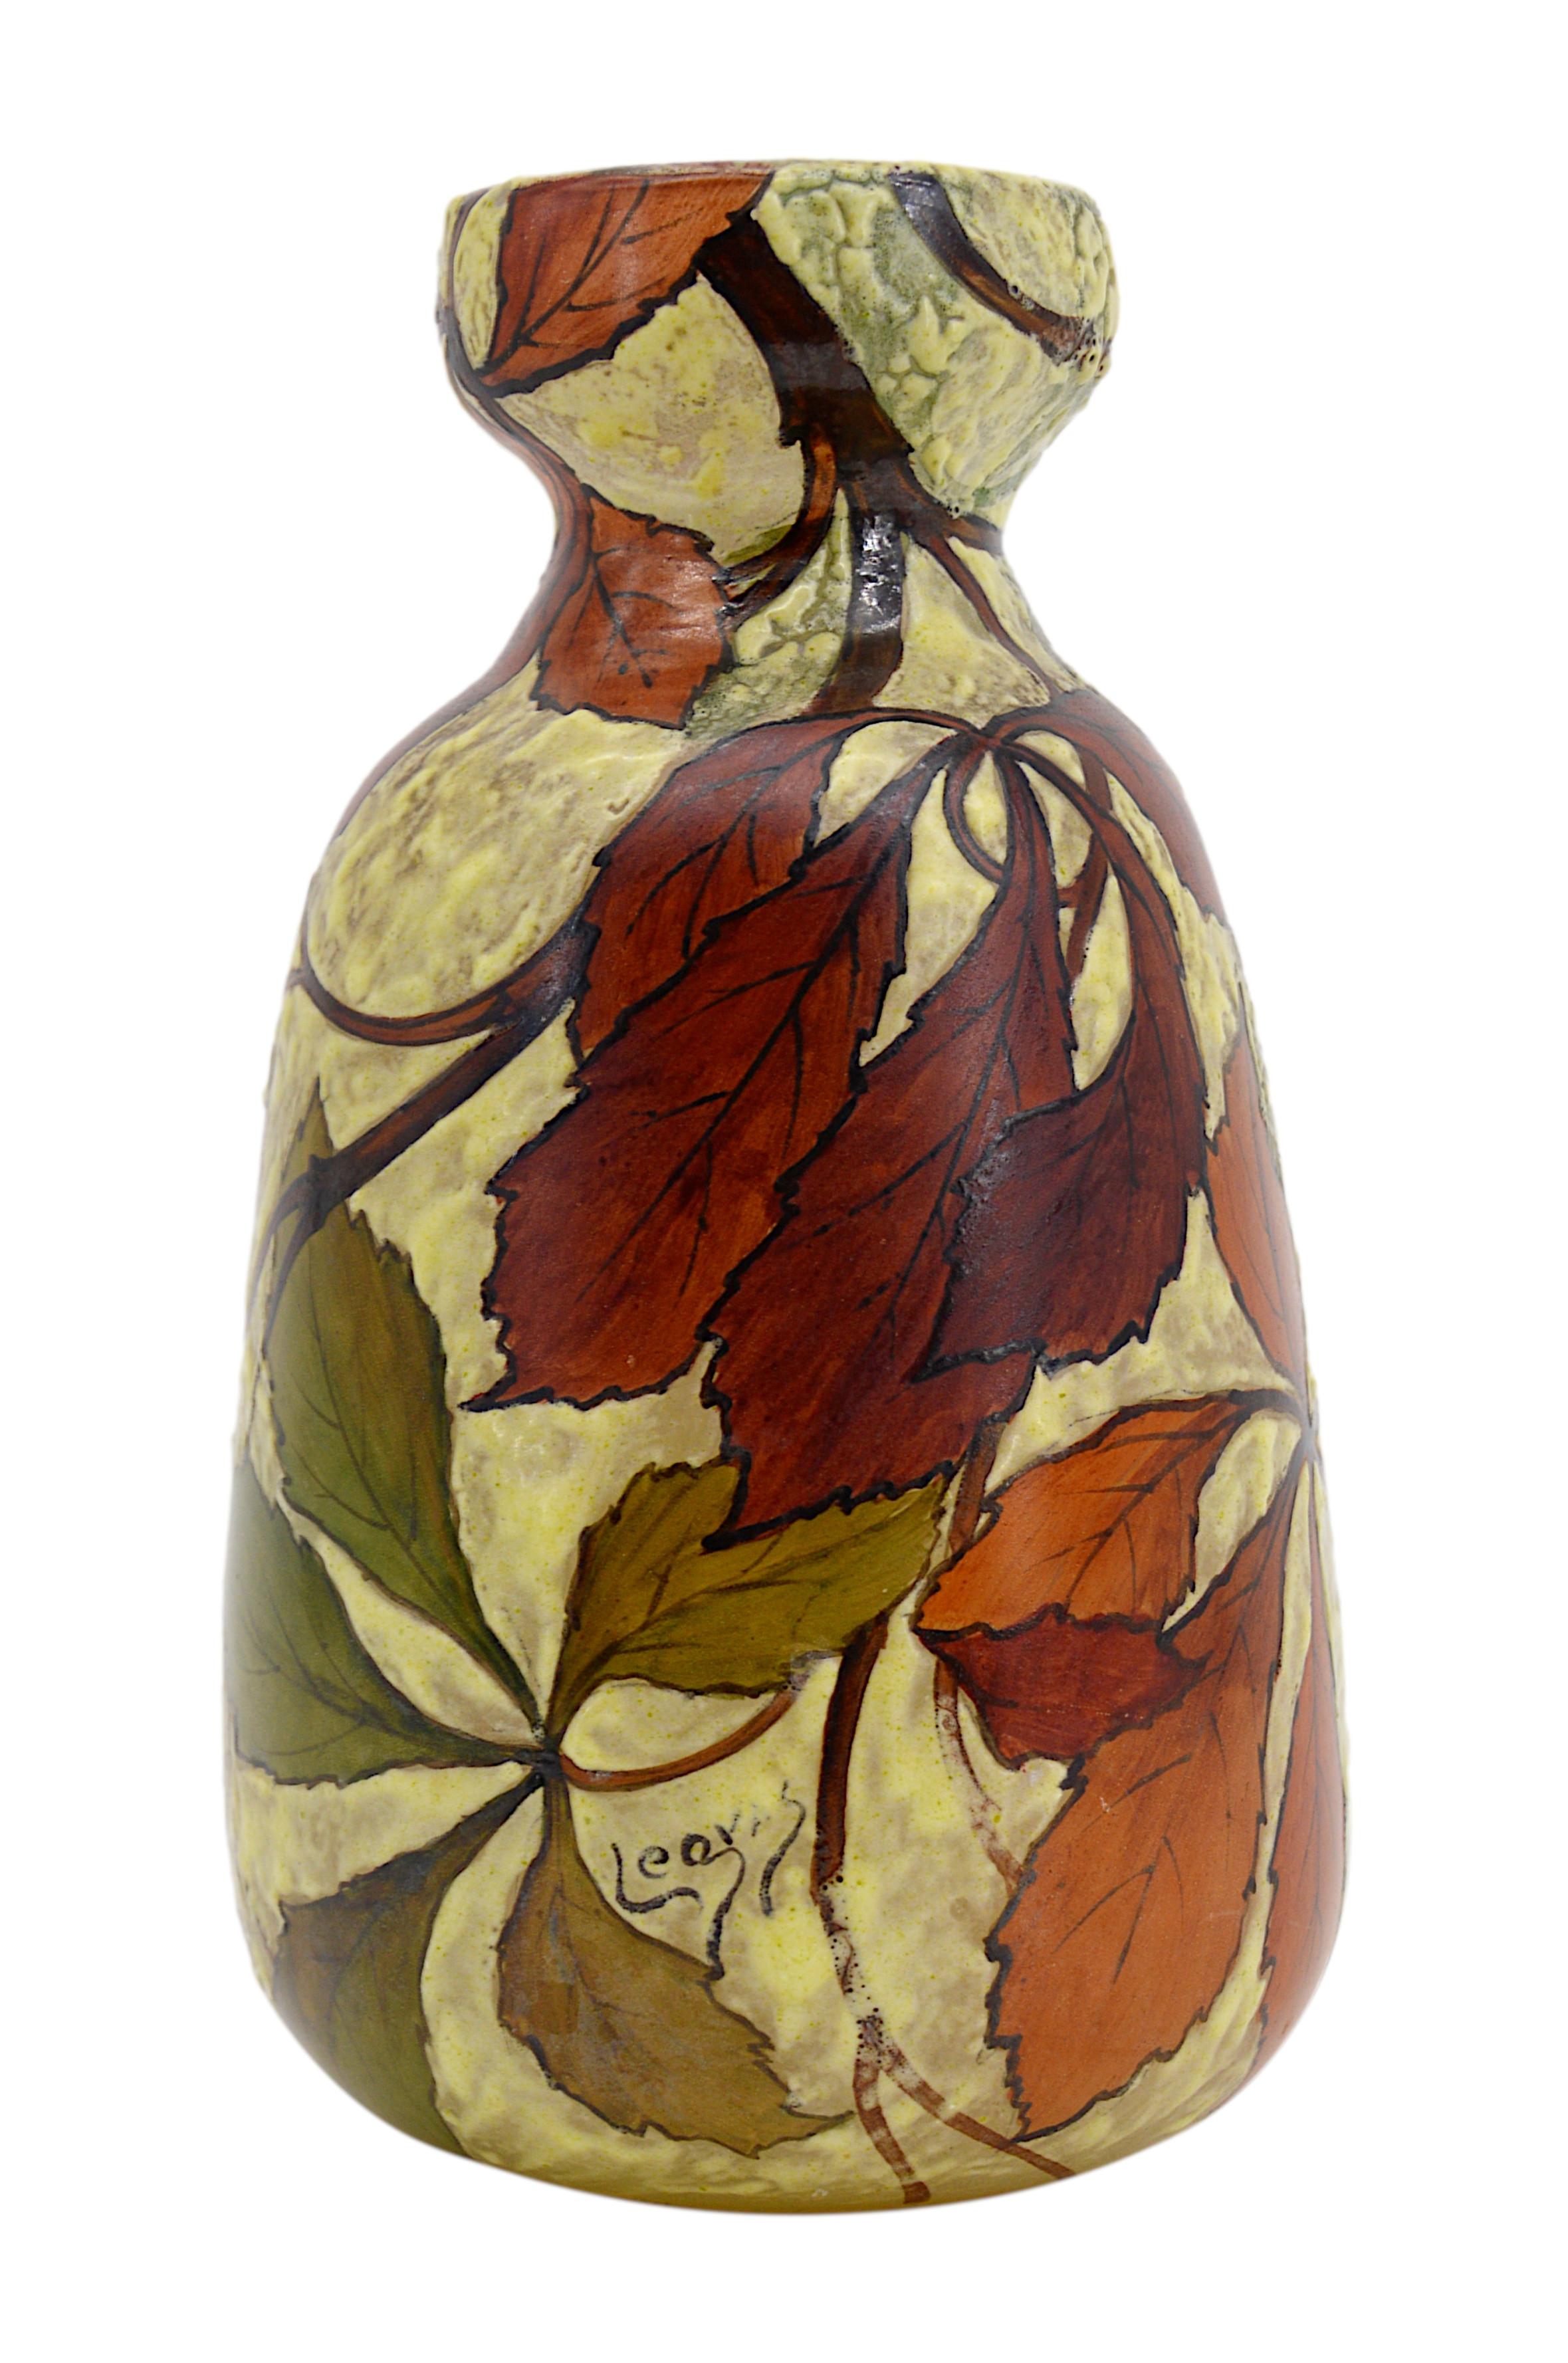 Art Glass Legras French Art Nouveau Enameled Vase, Early 1900s For Sale